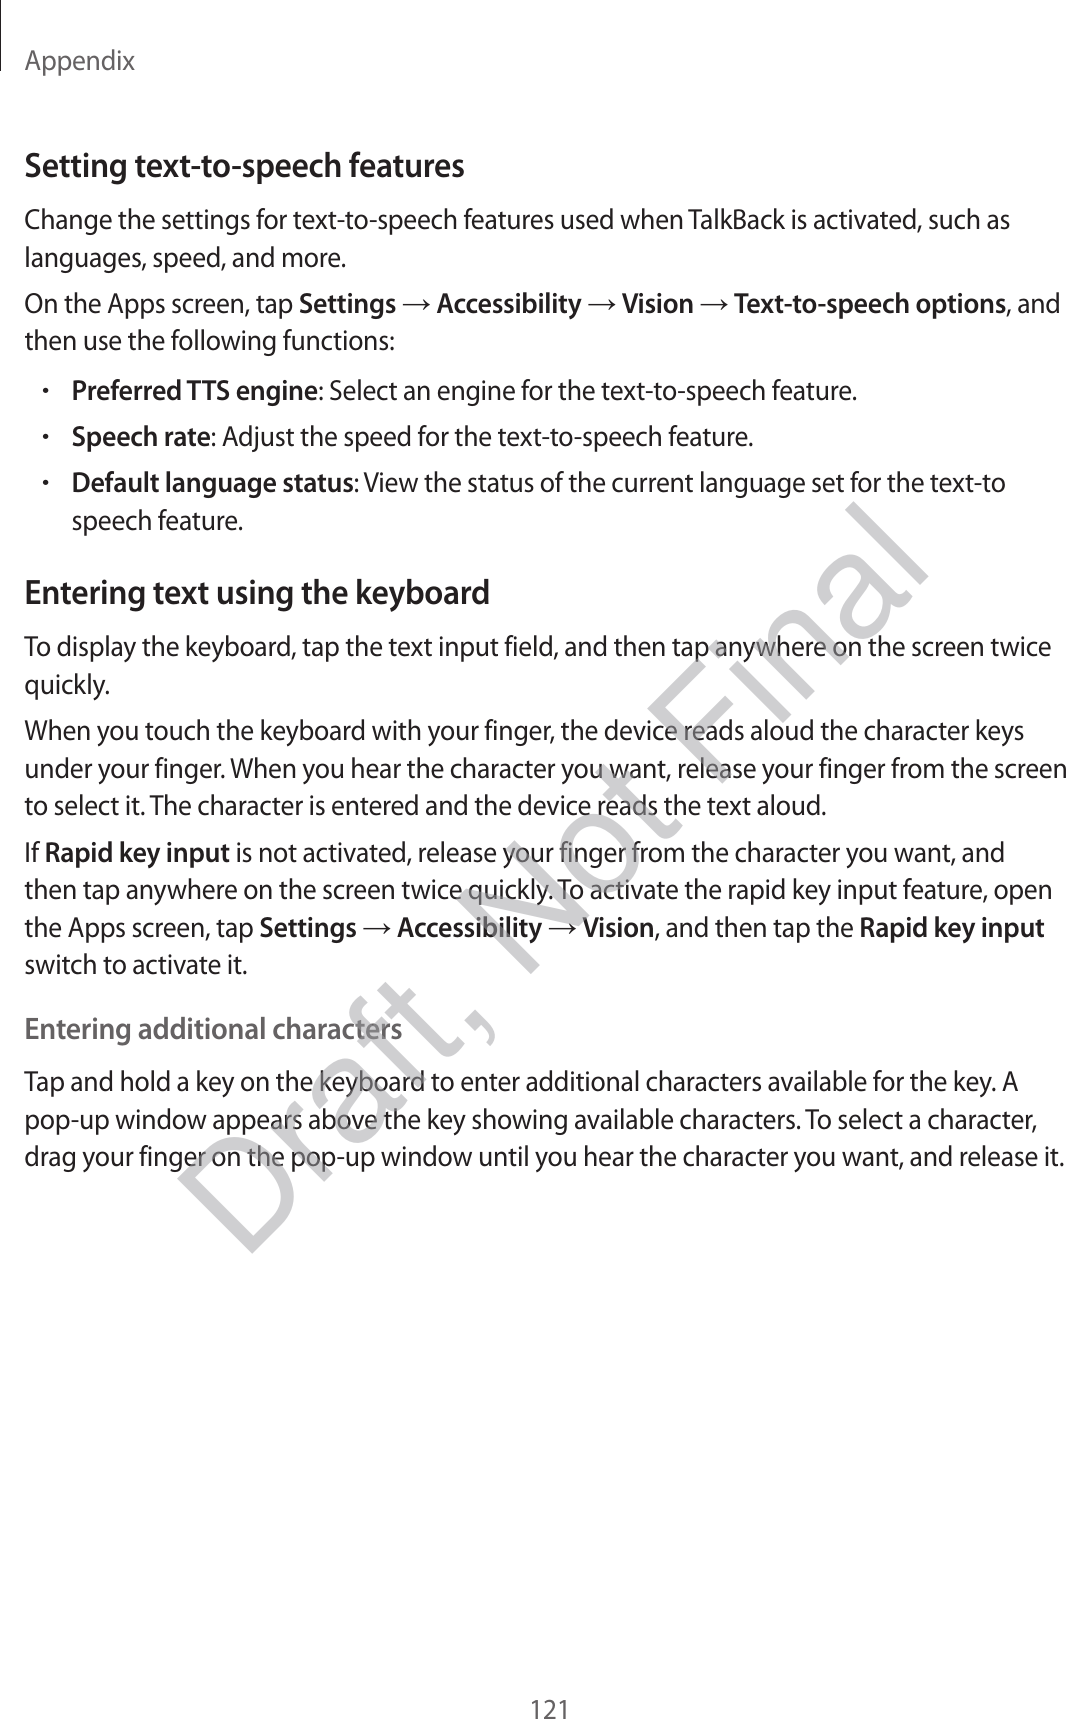 Appendix121Setting text-to-speech featuresChange the settings for text-to-speech features used when TalkBack is activated, such as languages, speed, and more.On the Apps screen, tap Settings  Accessibility  Vision  Text-to-speech options, and then use the following functions:•Preferred TTS engine: Select an engine for the text-to-speech feature.•Speech rate: Adjust the speed for the text-to-speech feature.•Default language status: View the status of the current language set for the text-tospeech feature.Entering text using the keyboardTo display the keyboard, tap the text input field, and then tap anywhere on the screen twice quickly.When you touch the keyboard with your finger, the device reads aloud the character keys under your finger. When you hear the character you want, release your finger from the screen to select it. The character is entered and the device reads the text aloud.If Rapid key input is not activated, release your finger from the character you want, and then tap anywhere on the screen twice quickly. To activate the rapid key input feature, open the Apps screen, tap Settings  Accessibility  Vision, and then tap the Rapid key input switch to activate it.Entering additional charactersTap and hold a key on the keyboard to enter additional characters available for the key. A pop-up window appears above the key showing available characters. To select a character, drag your finger on the pop-up window until you hear the character you want, and release it.Draft, Not Final